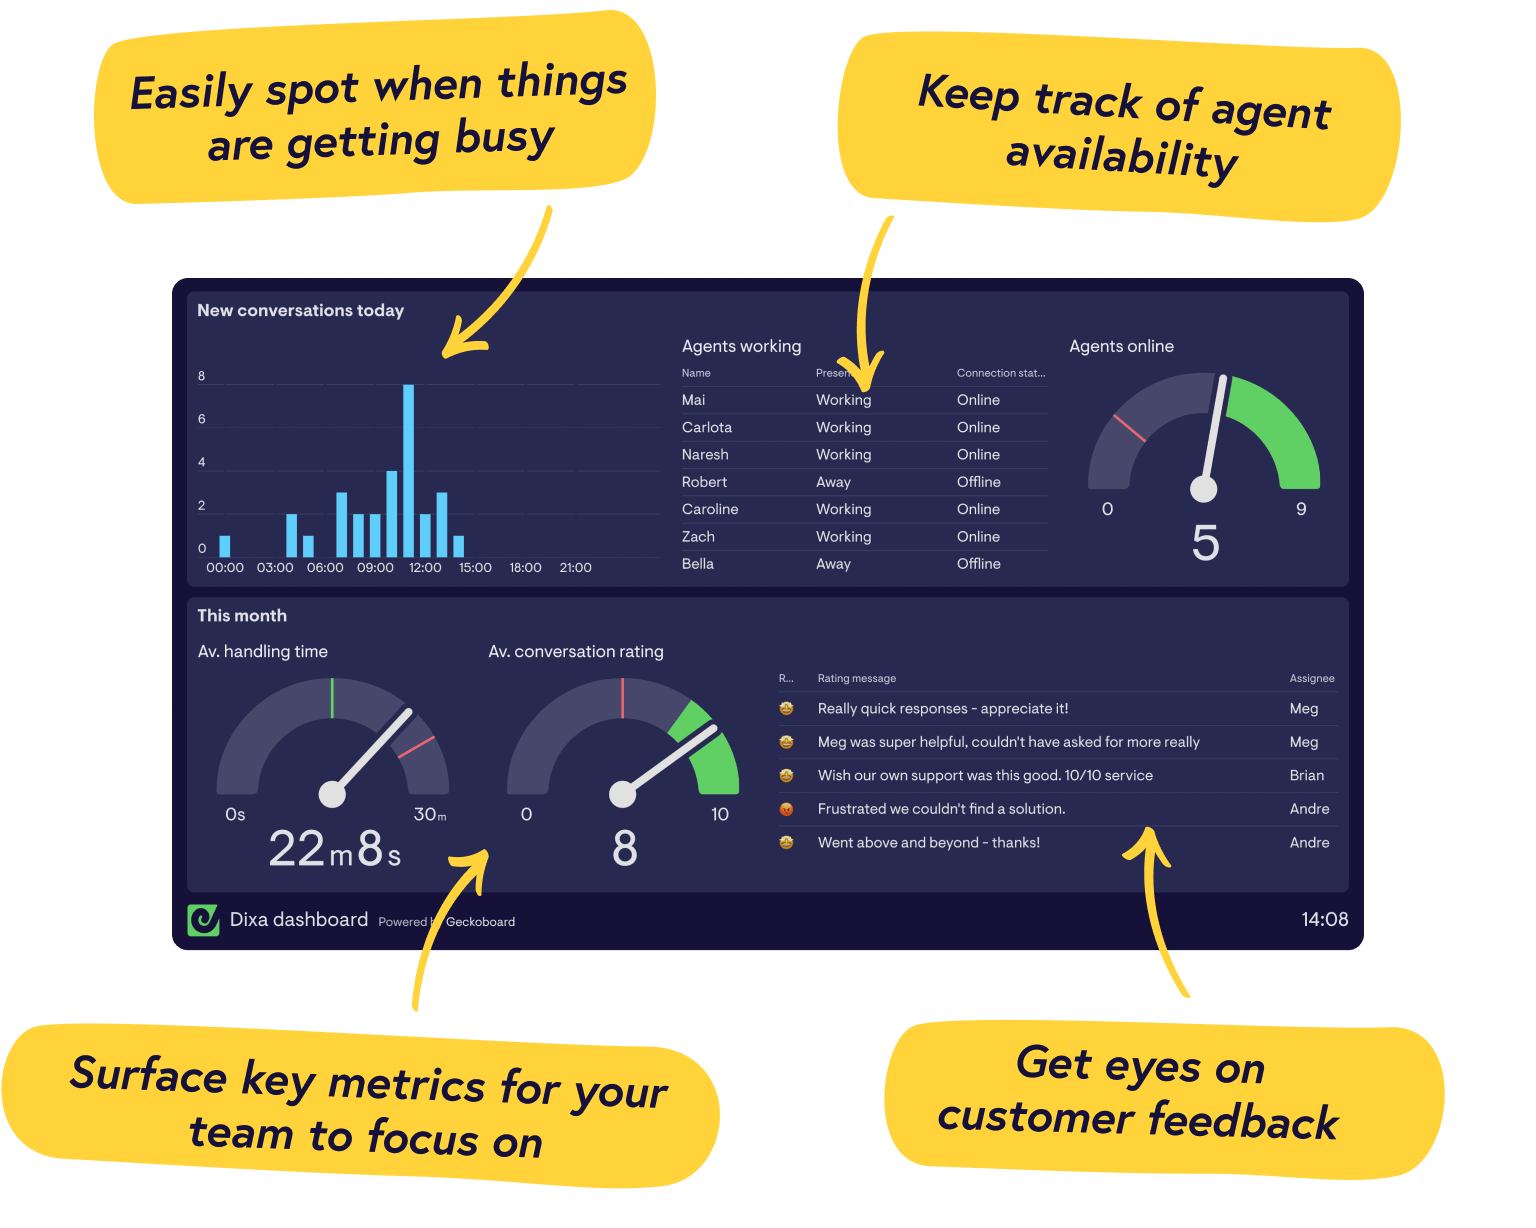 Real-time Dixa dashboards from Geckoboard